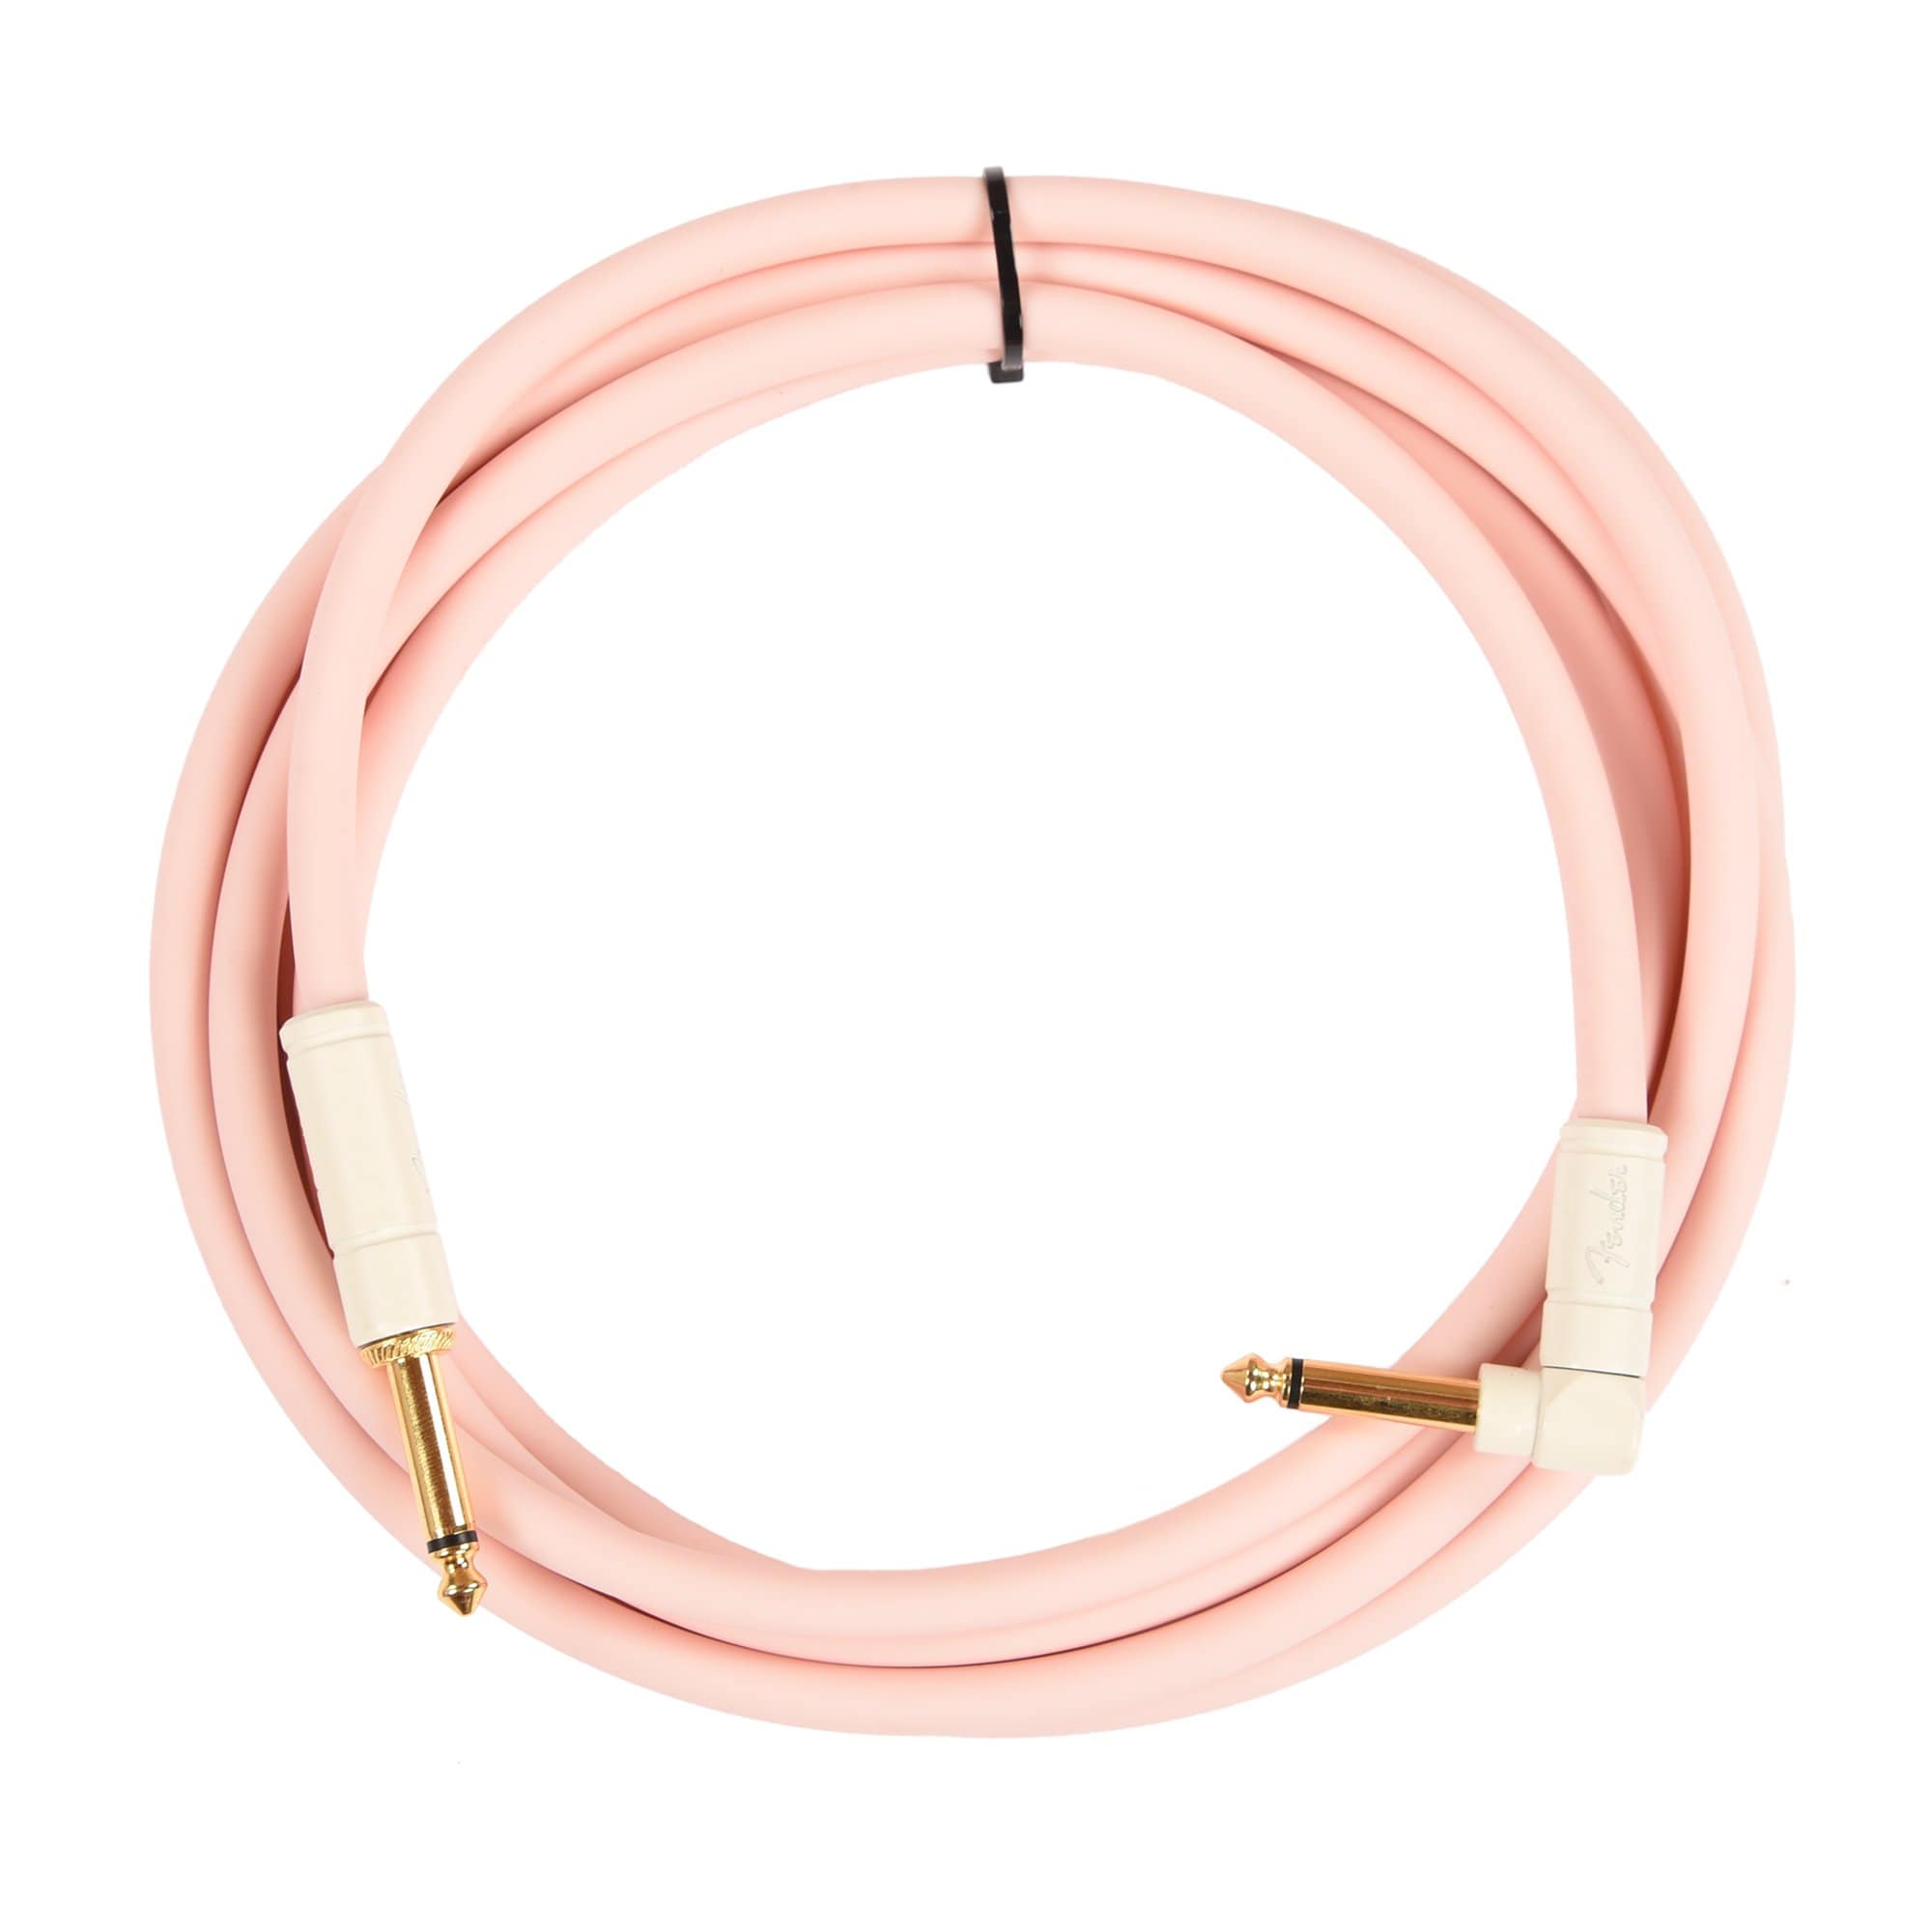 Fender Deluxe Instrument Cable Shell Pink 10' Angle-Straight